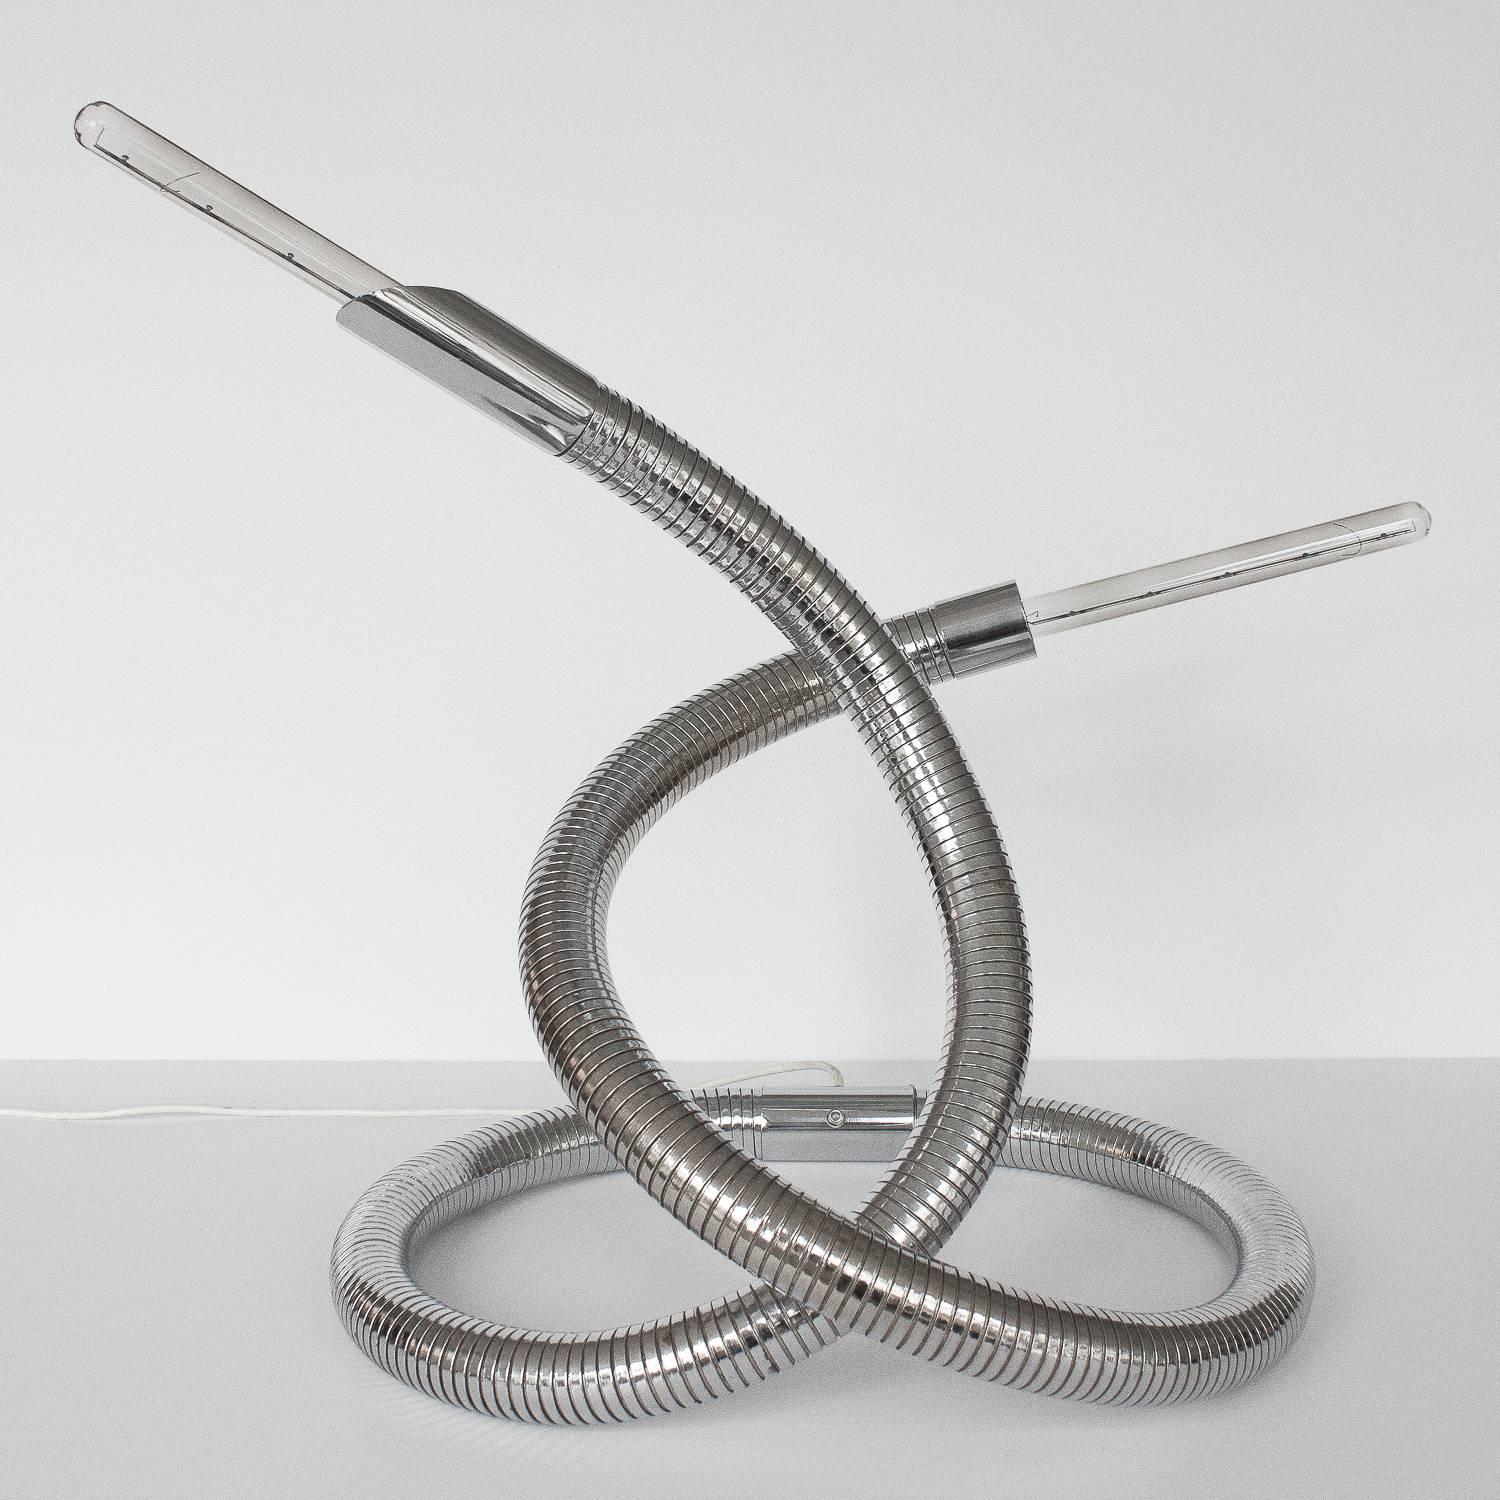 Rare and unusual 1960s Italian chrome flexible snake lamp. A 10 foot long chrome plated bendable 2" diameter metal tube can be configured in an infinite number of positions. Each end features a different shape fitting to create the sense of a